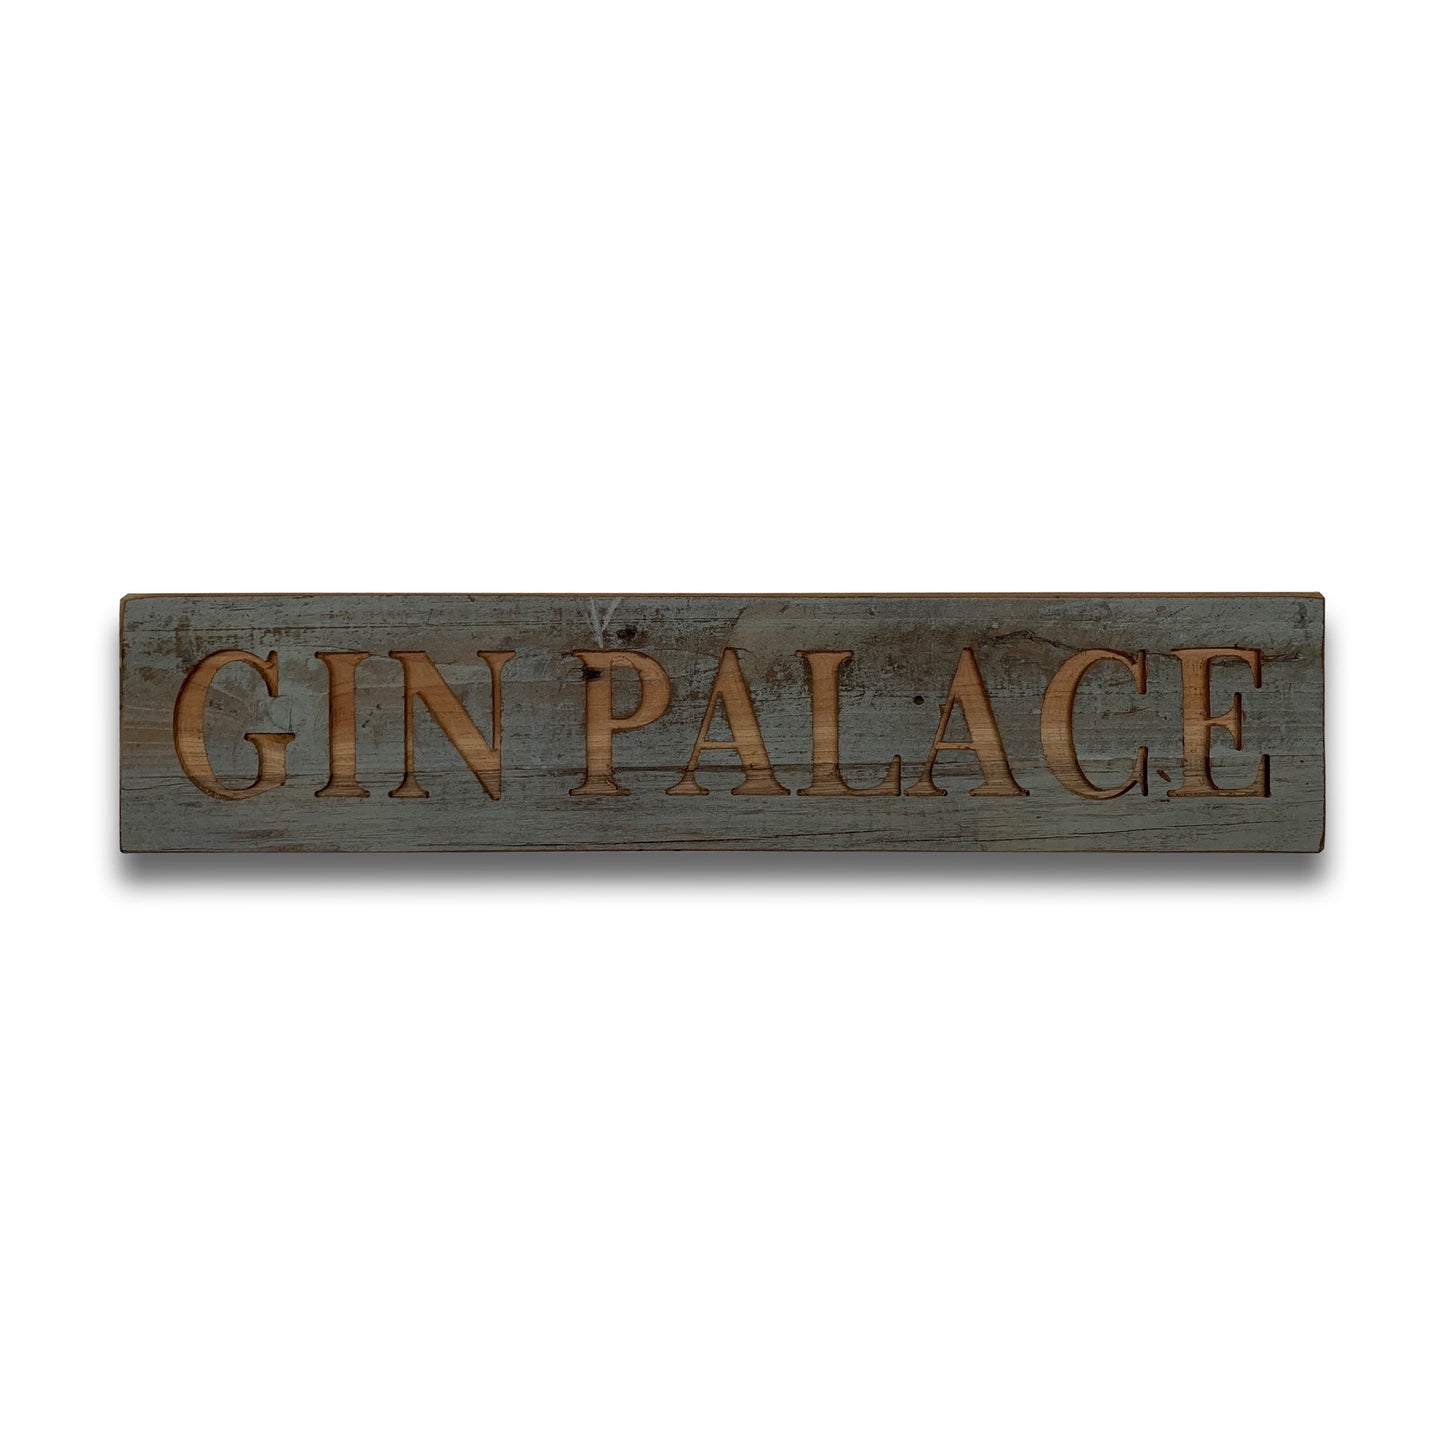 Gin Palace Grey Wash Wooden Message Plaque